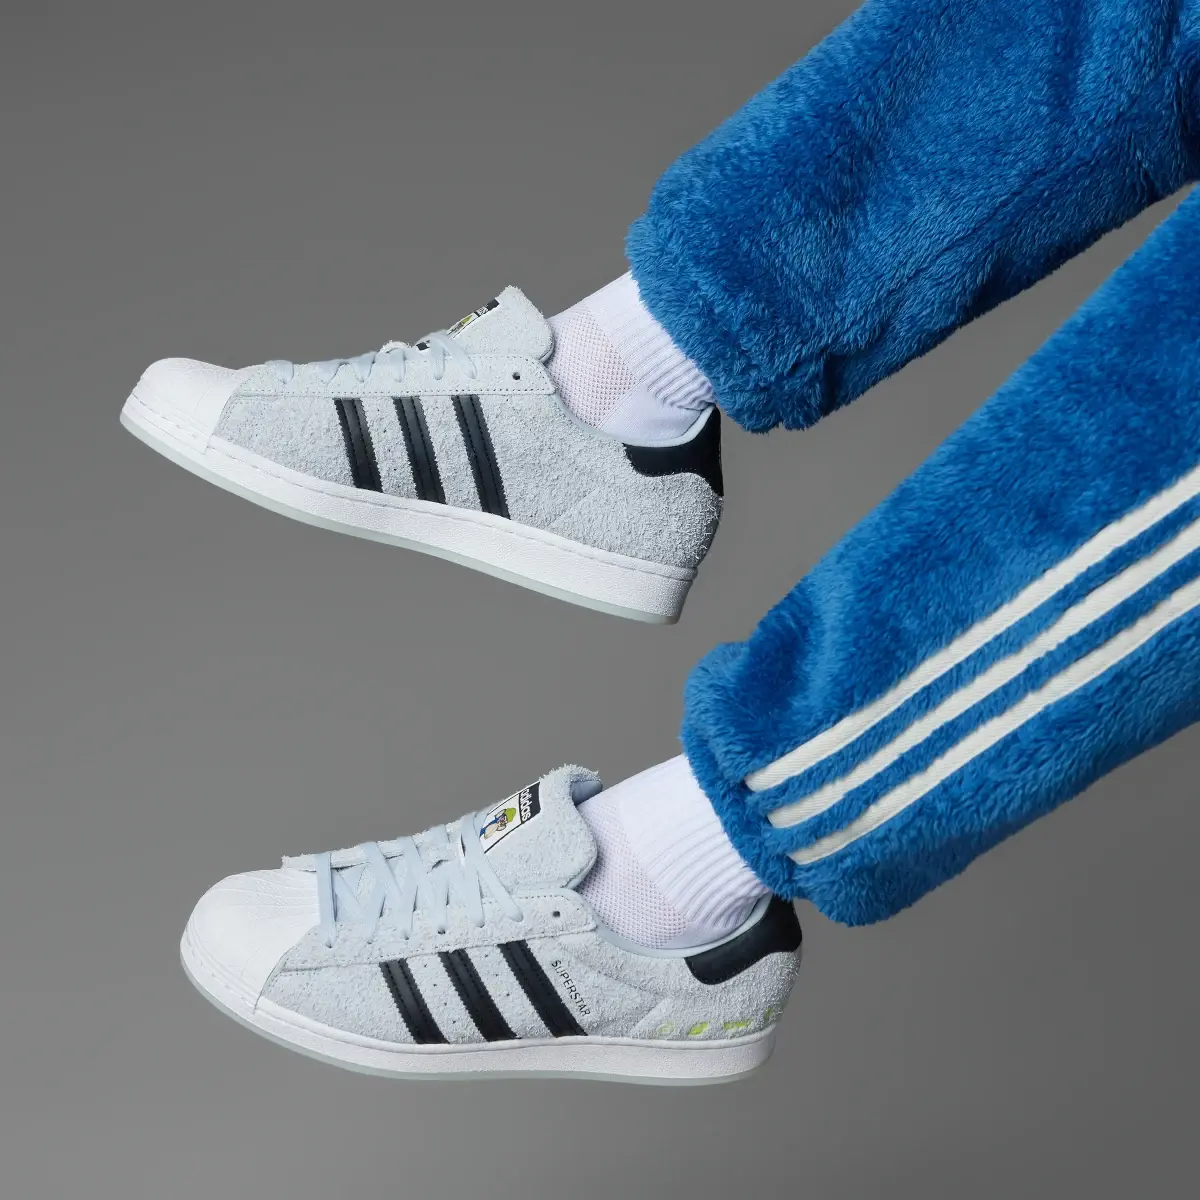 Adidas Into the Metaverse Superstar Shoes. 2